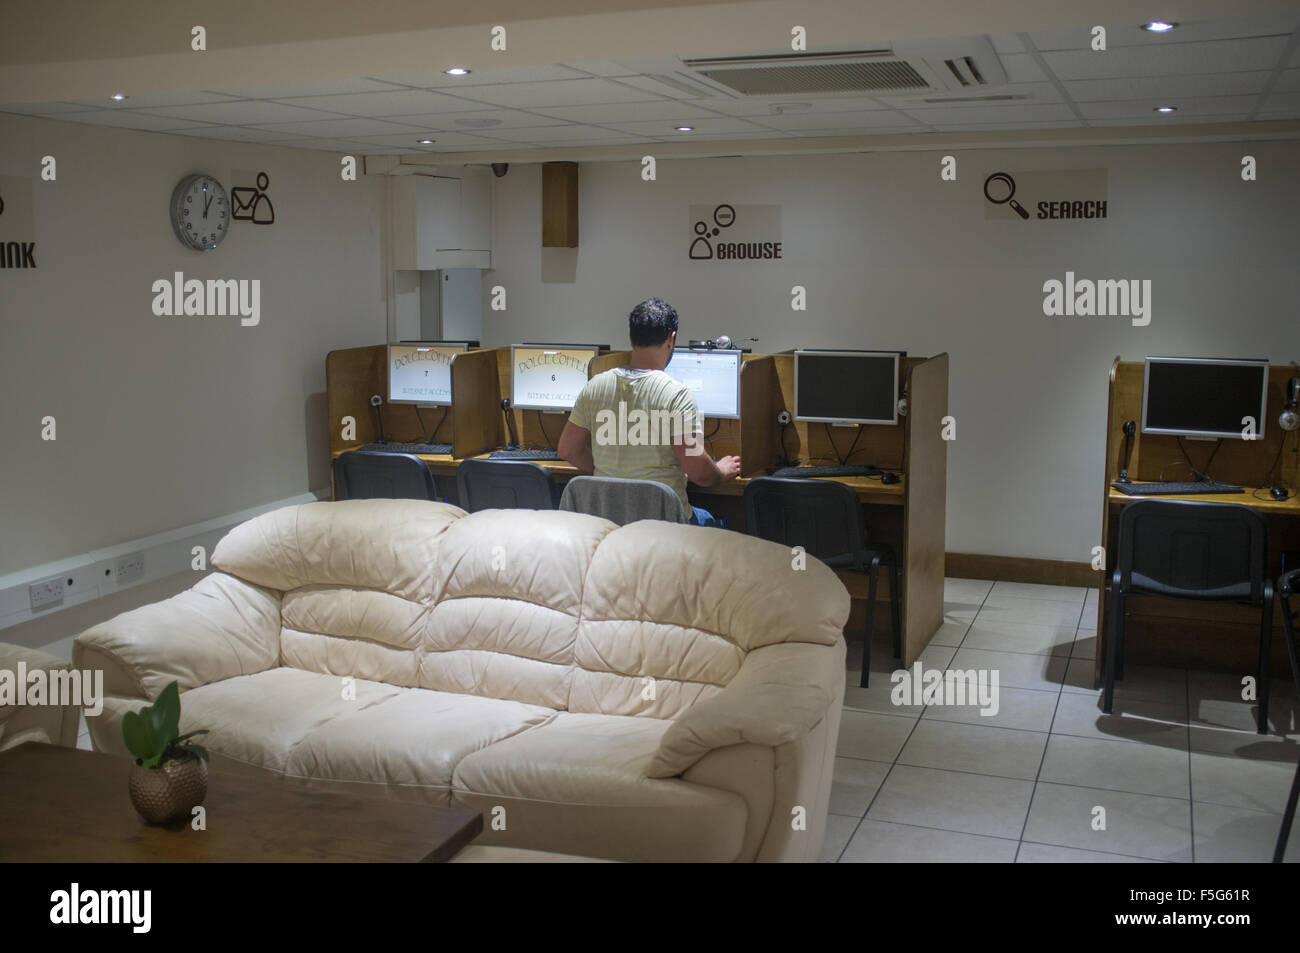 Internet cafe in the basement of a cafe in Islington, London. Stock Photo